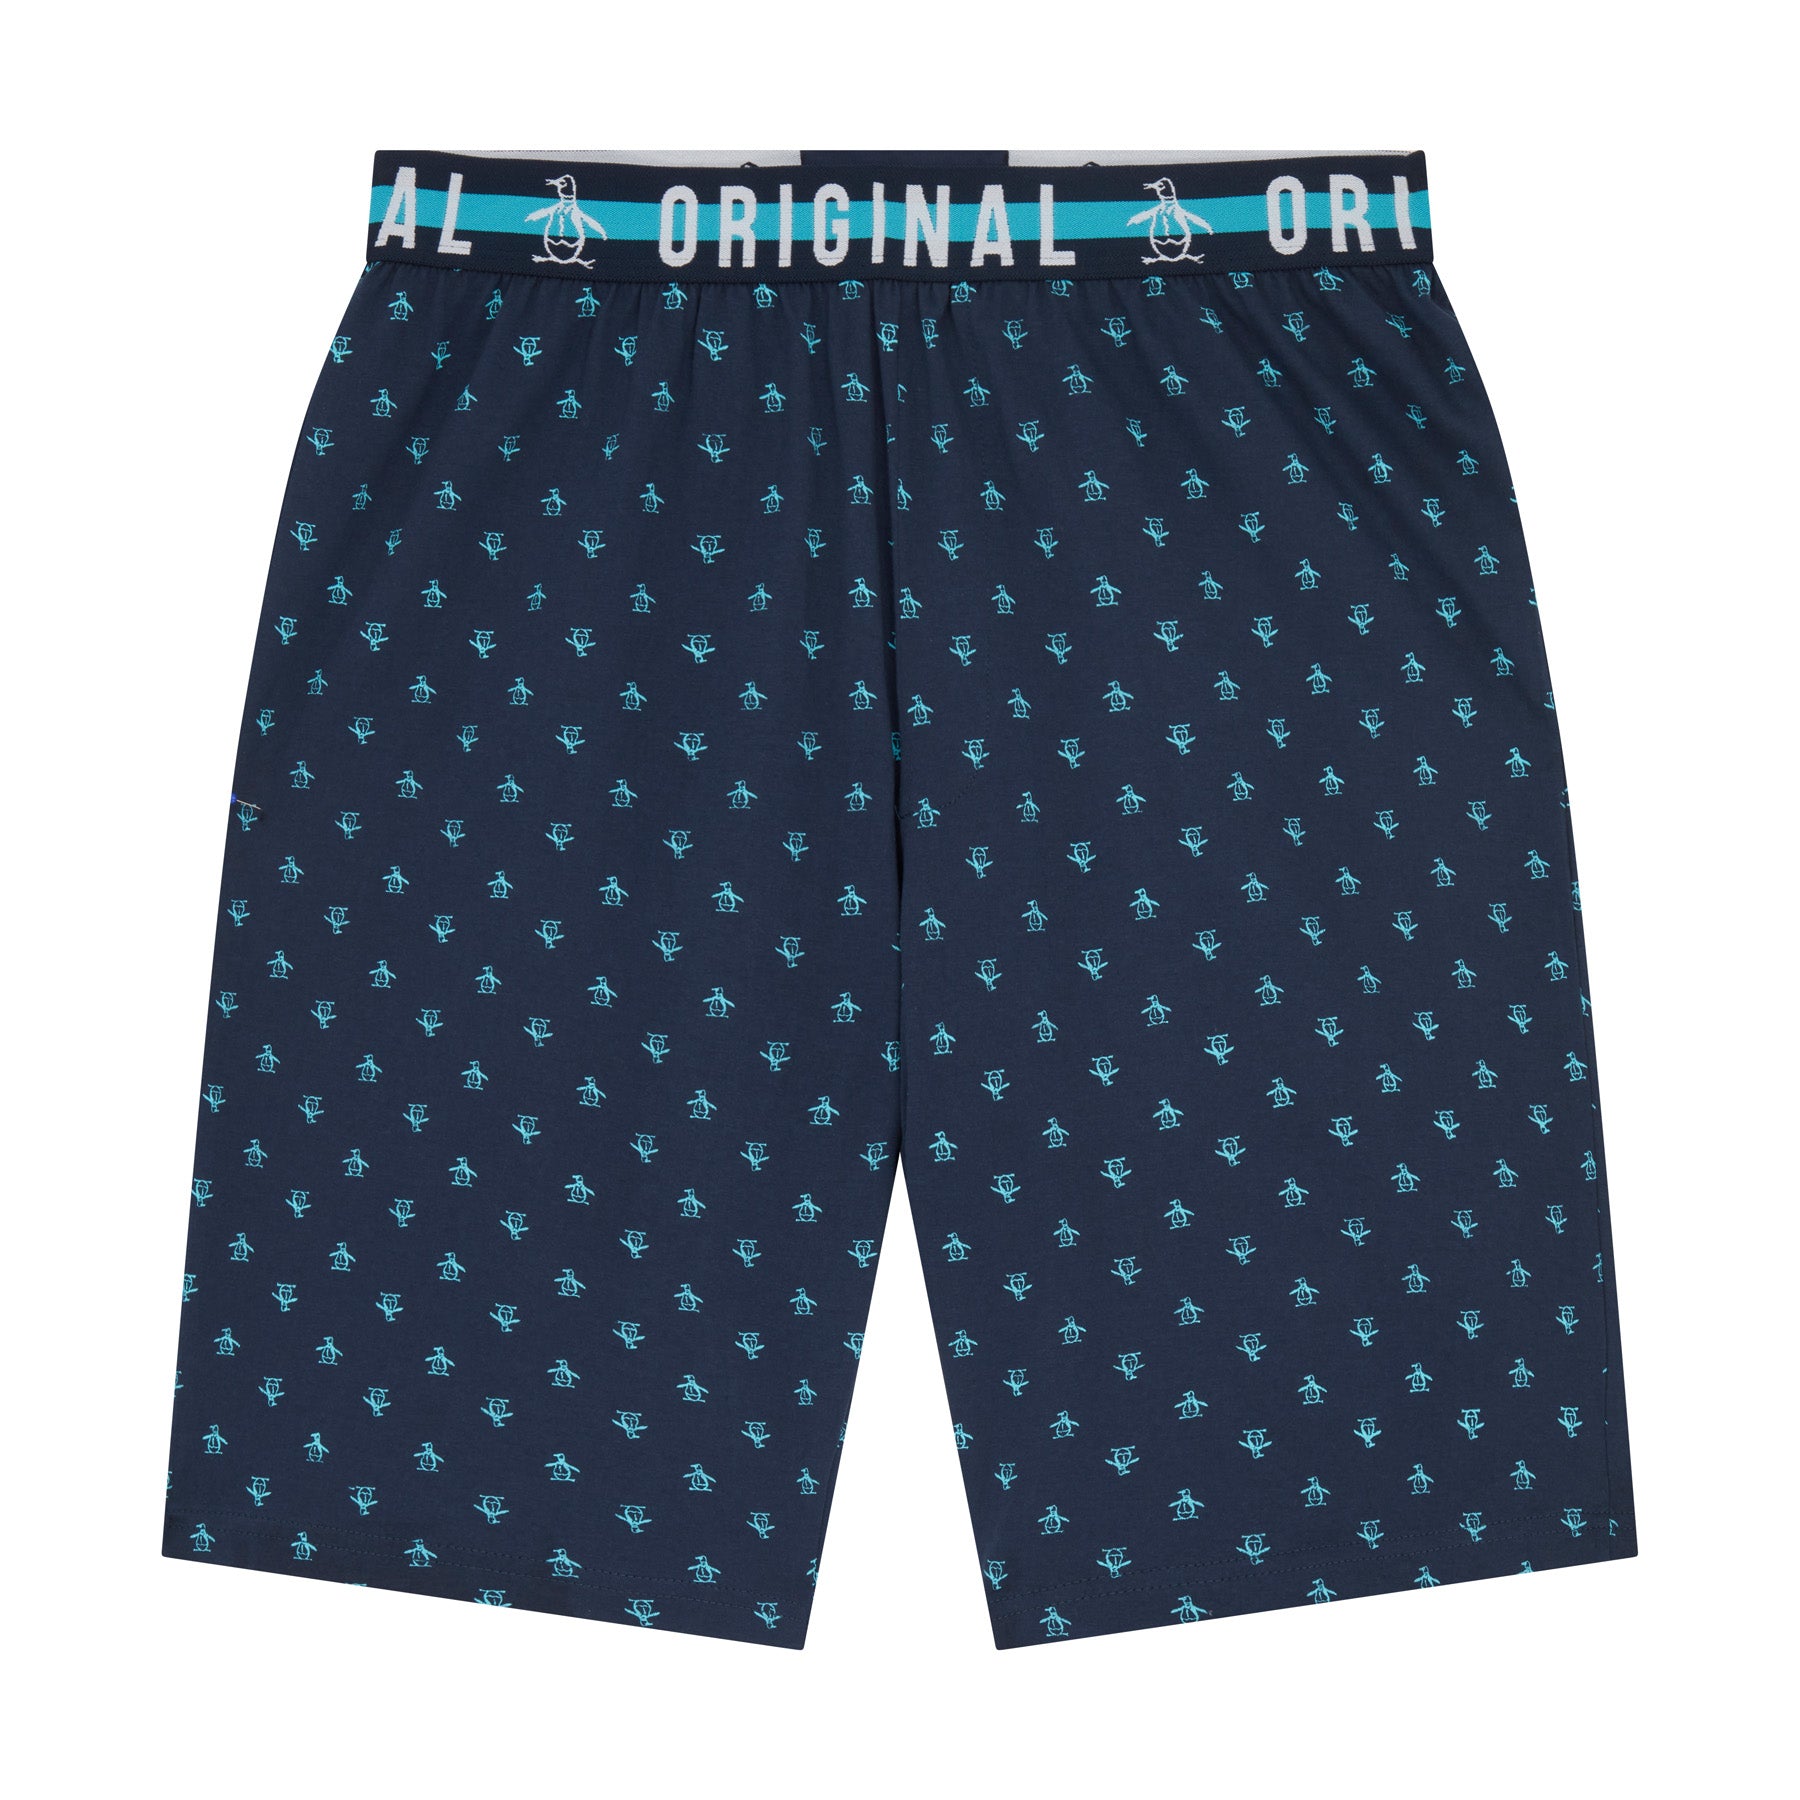 View Penguin Pete Lounge Shorts In Navy information